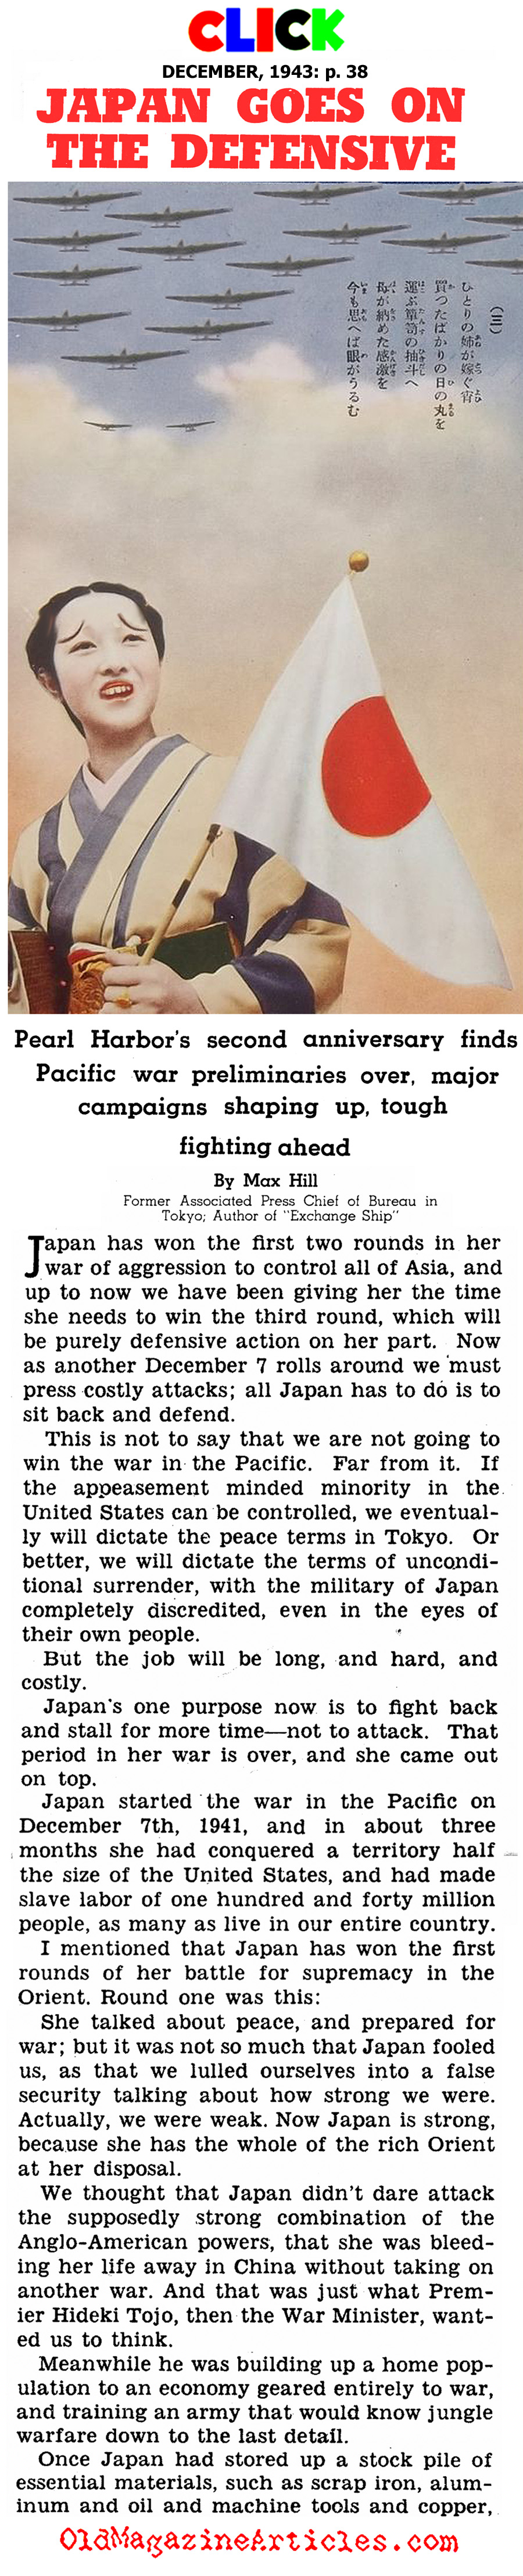 When Japan Went on the Defensive (Click Magazine, 1943)